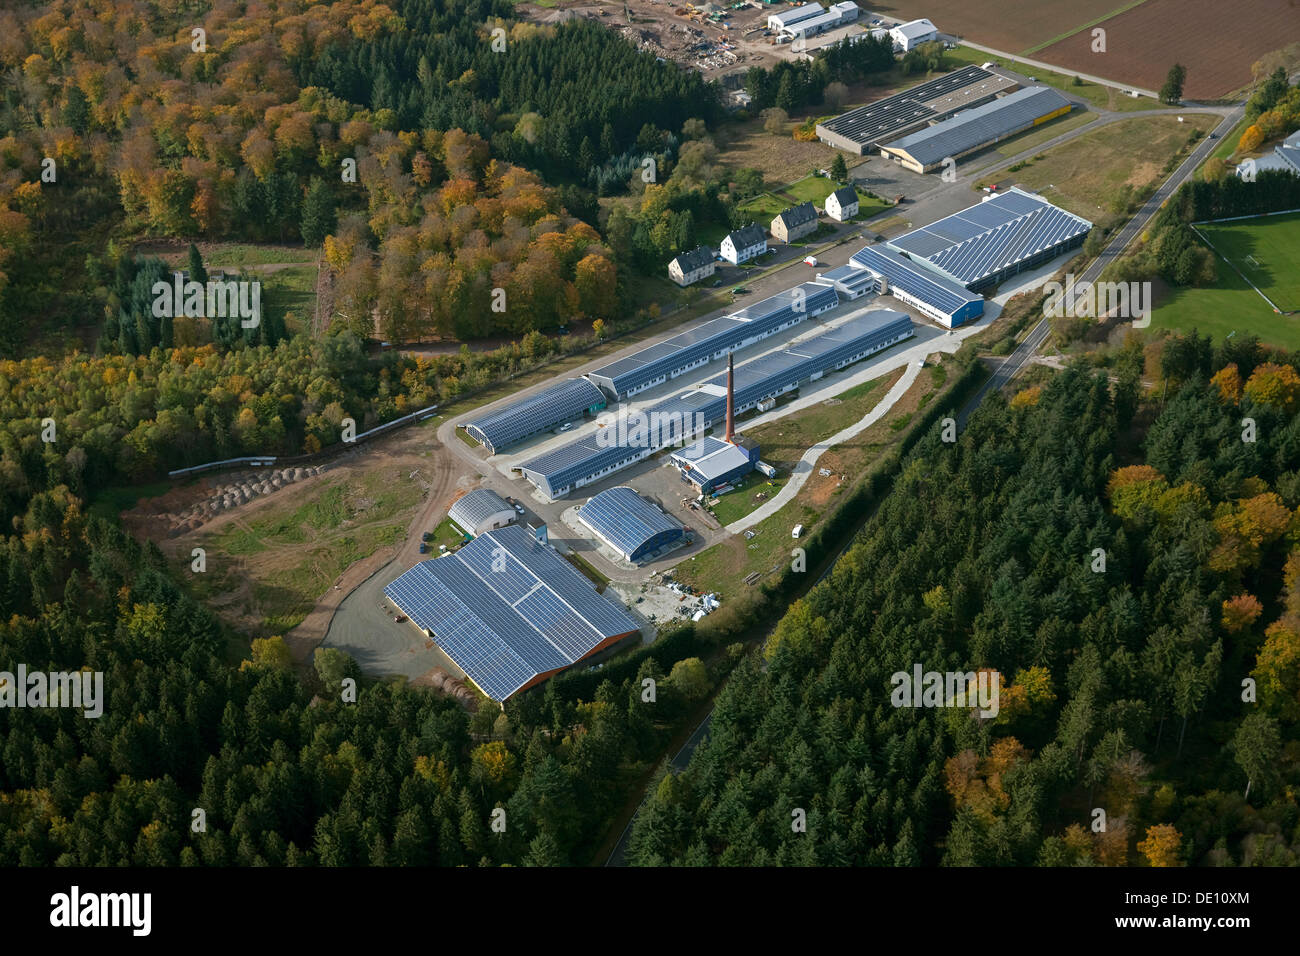 Aerial view, a factory with solar panels on the roof, Grafenwald industrial park, Hunsrueckhoehenstrasse scenic road Stock Photo